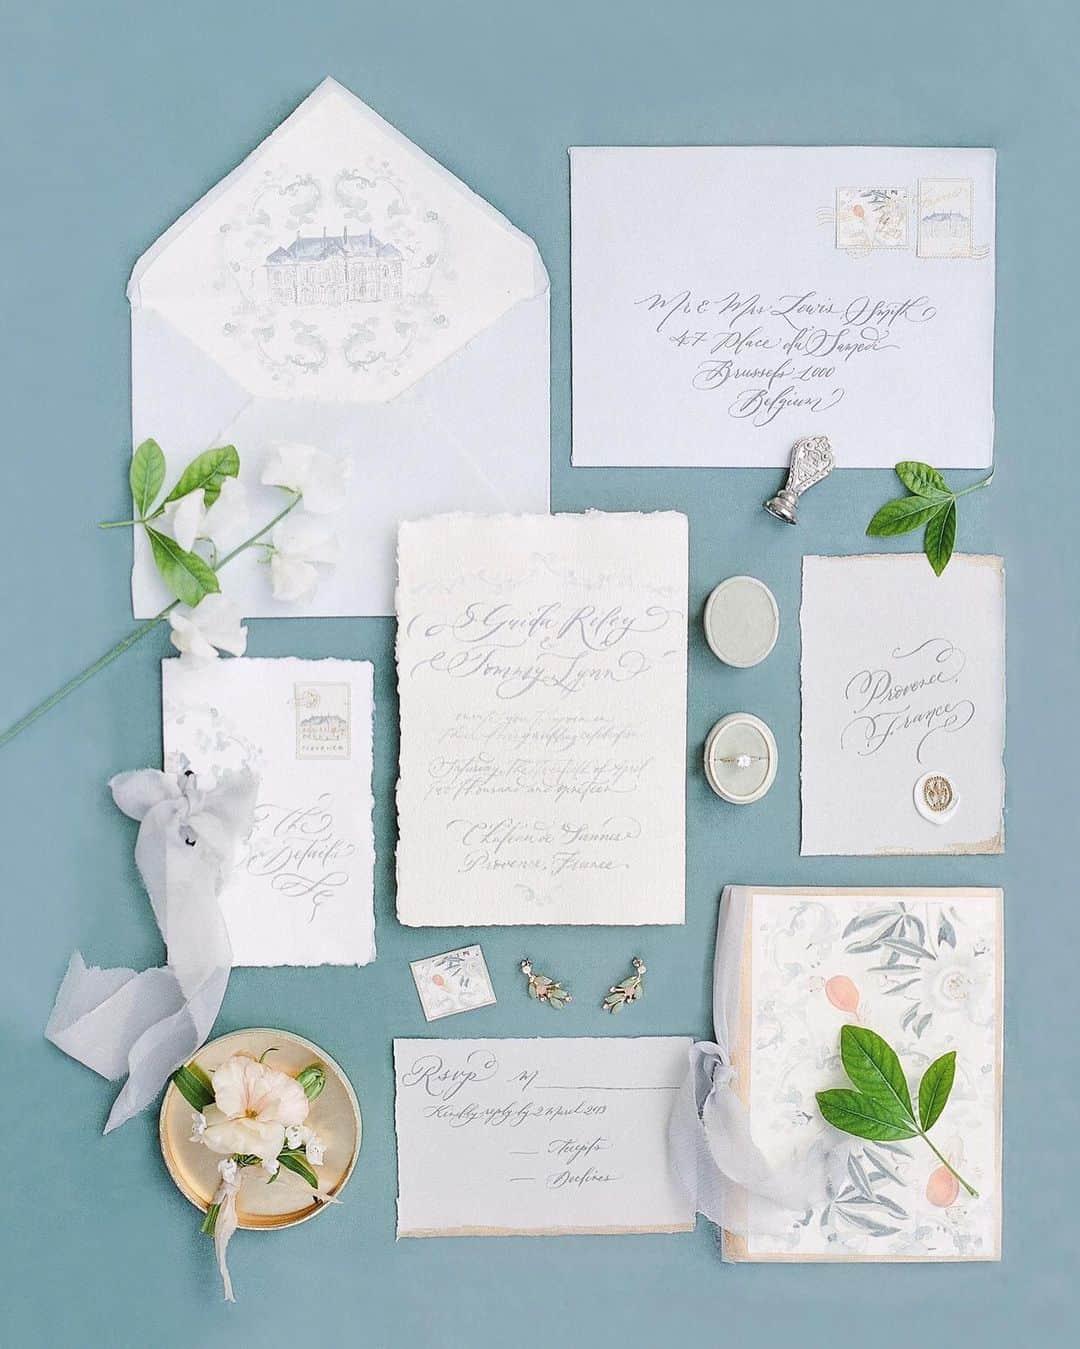 Veronica Halimさんのインスタグラム写真 - (Veronica HalimInstagram)「South of France handmade invitation series for @jenniferfoxweddings and @oliverflyphotography featured on @stylemepretty —  Photographer | @oliverflyphotography Planning & Design and Welcome Box | @jenniferfoxweddings Floral Design | @floresie Cake Design & Designer Cookies | @madeincake Venue | @chateaudesannes Makeup | @ylva.langenskiold Hair | @sarrana Tabletop Rentals | @maison.christina Linens | @madamedelamaison Ring Box | @je_promis Catering | @roland_paix Rentals | @be_lounge Stationer & Calligraphy | @truffypi Dress Designer | @berta Bridal Boutique | @metal_flaque Men’s Suit | @chrisvonmartial Women’s Shoes | @bellabelleshoes Vintage Car | @provenceclassics Jewelry & Accessories | @lindsaymariedesign #jenniferfoxweddings #stylemepretty . #dinnerdecor #weddingday #dinnersetting #menu #destinationwedding  #tablesetting #weddingdetails #weddingmenu #weddingday #weddingdecor  #cotedazurwedding #weddingtable #provencewedding #southoffrancewedding #destinationwedding #luxurywedding #weddingsouthoffrance #destinationweddingplanner #weddingplannerprovence #instawedding #bespokeweddingdress #vhcalligraphy #truffypi #ウェディング #ウェディングアイテム #カリグラフィー #カリグラファ #モダンカリグラフィー #カリグラフィースタイリング」6月19日 10時21分 - truffypi